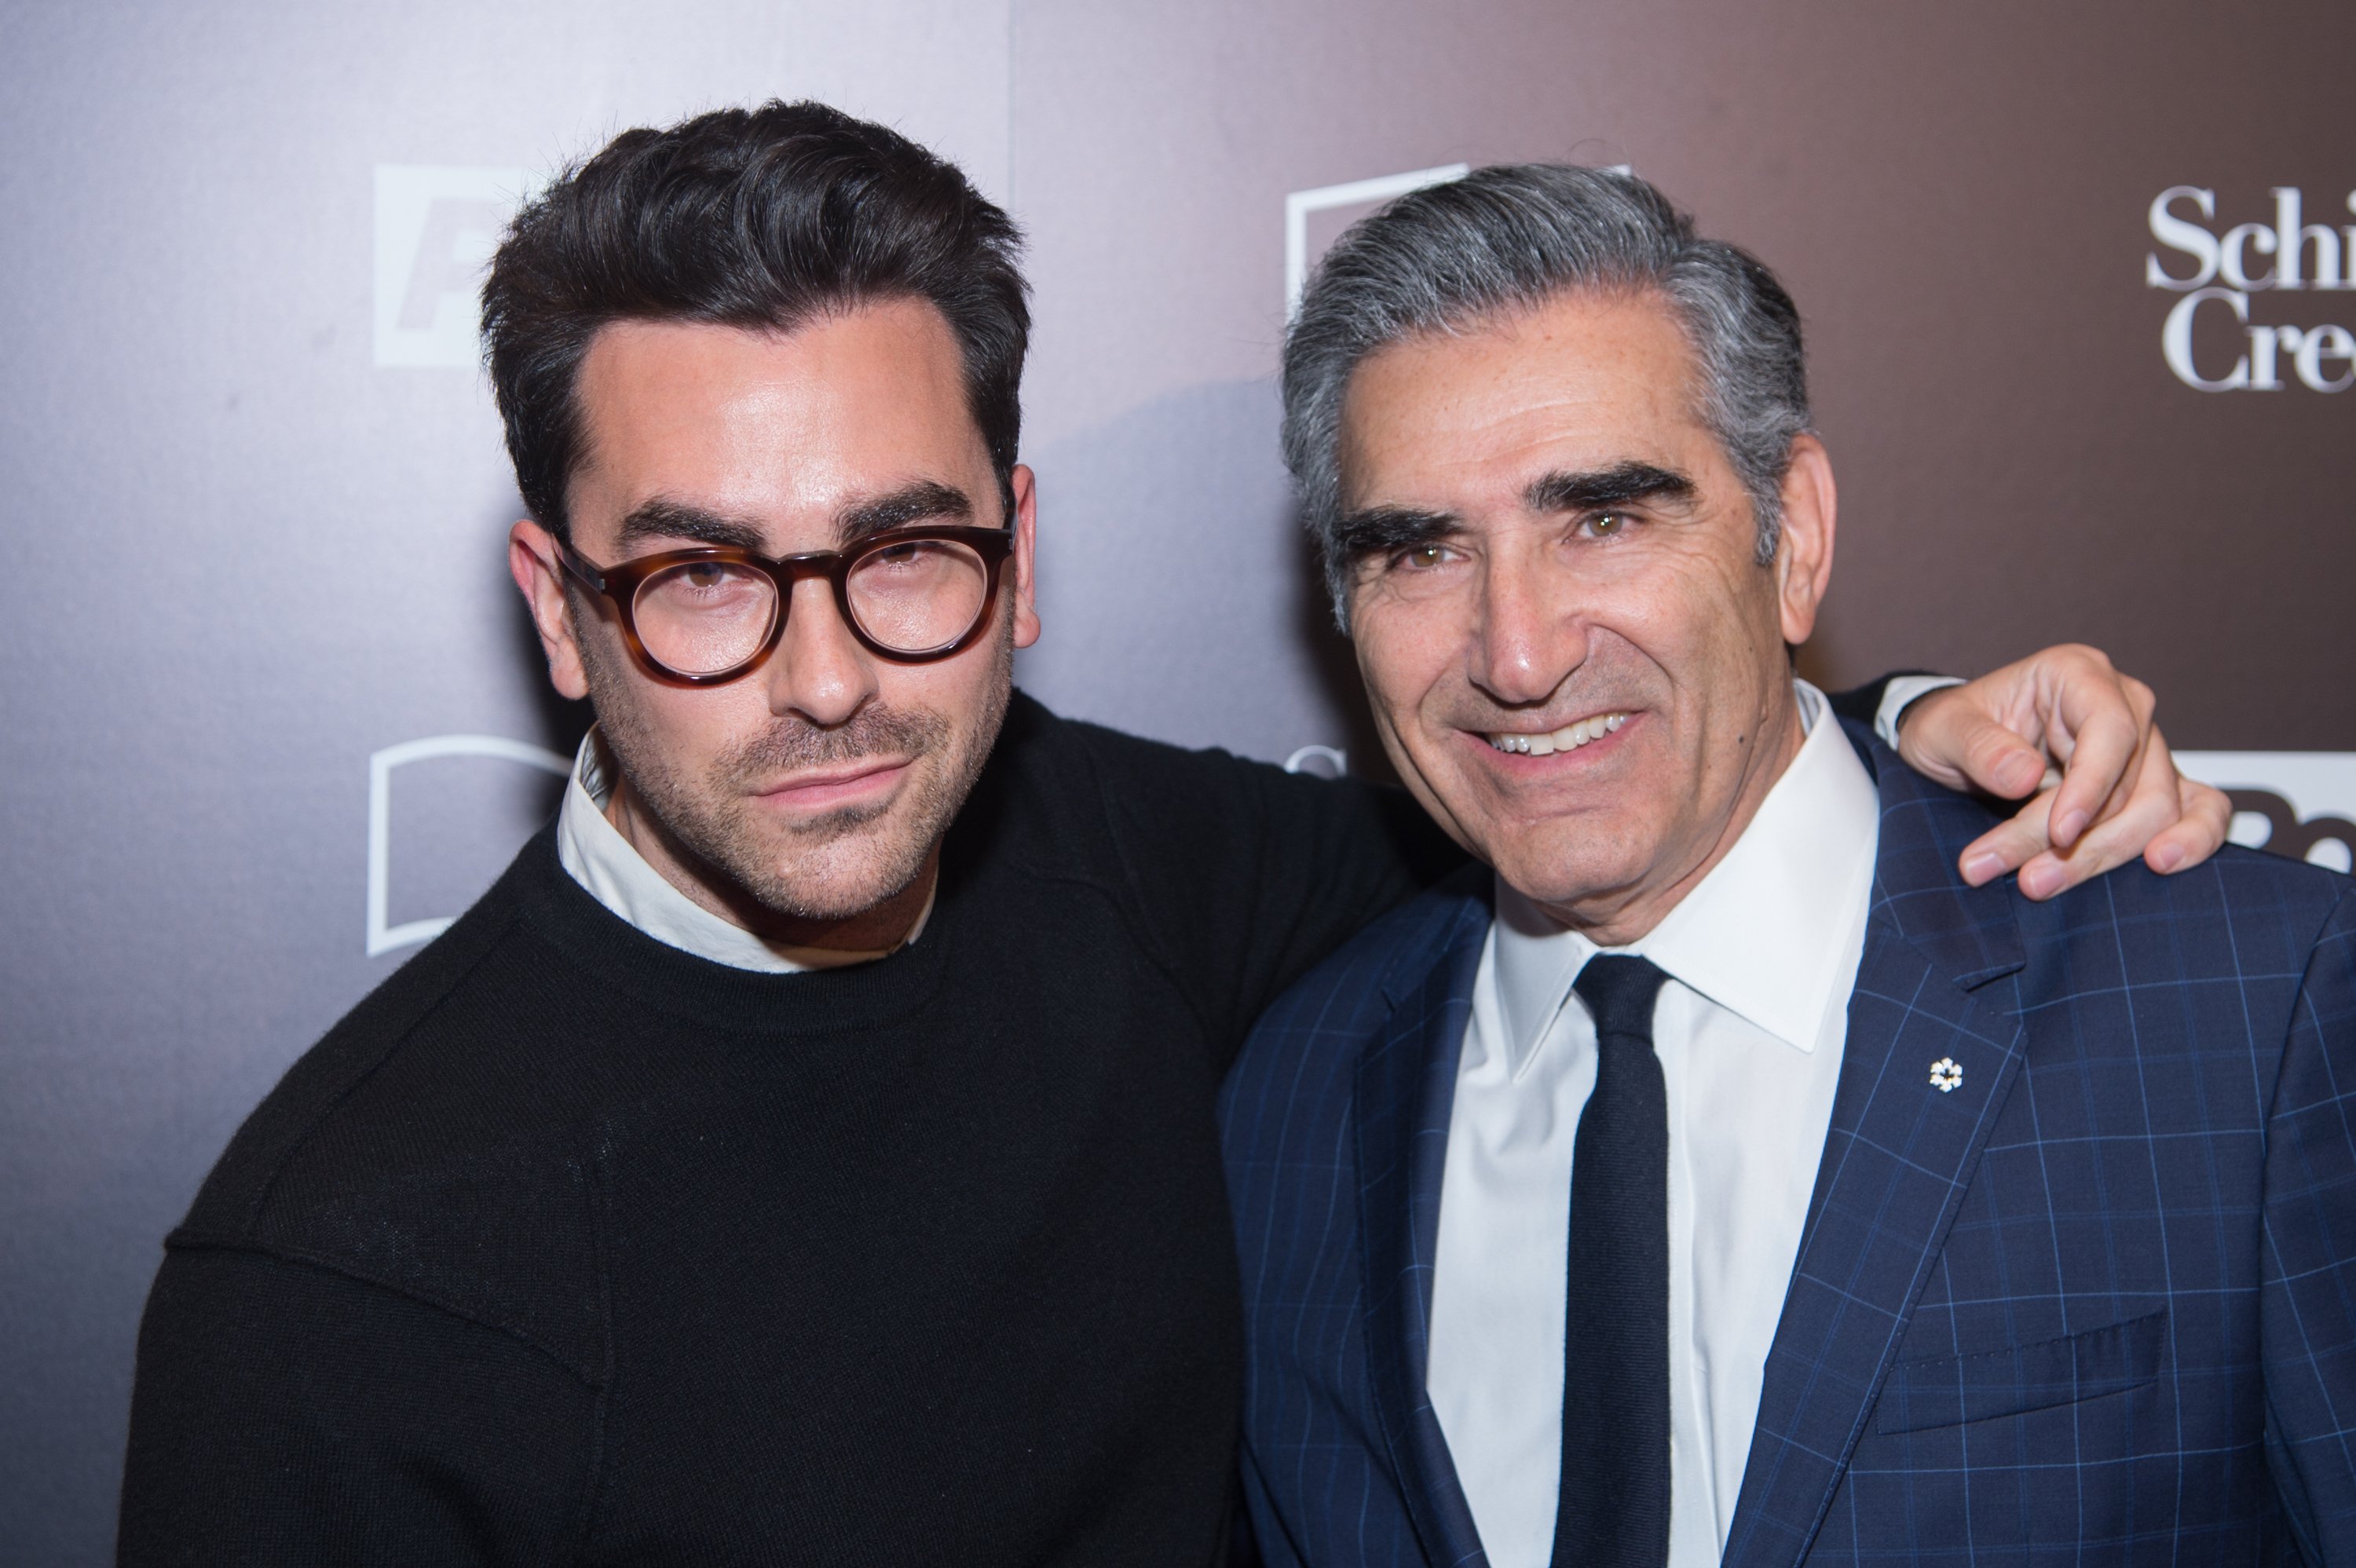 Schitt's Creek': Why Dan Levy Tried To Avoid Working With Eugene Levy